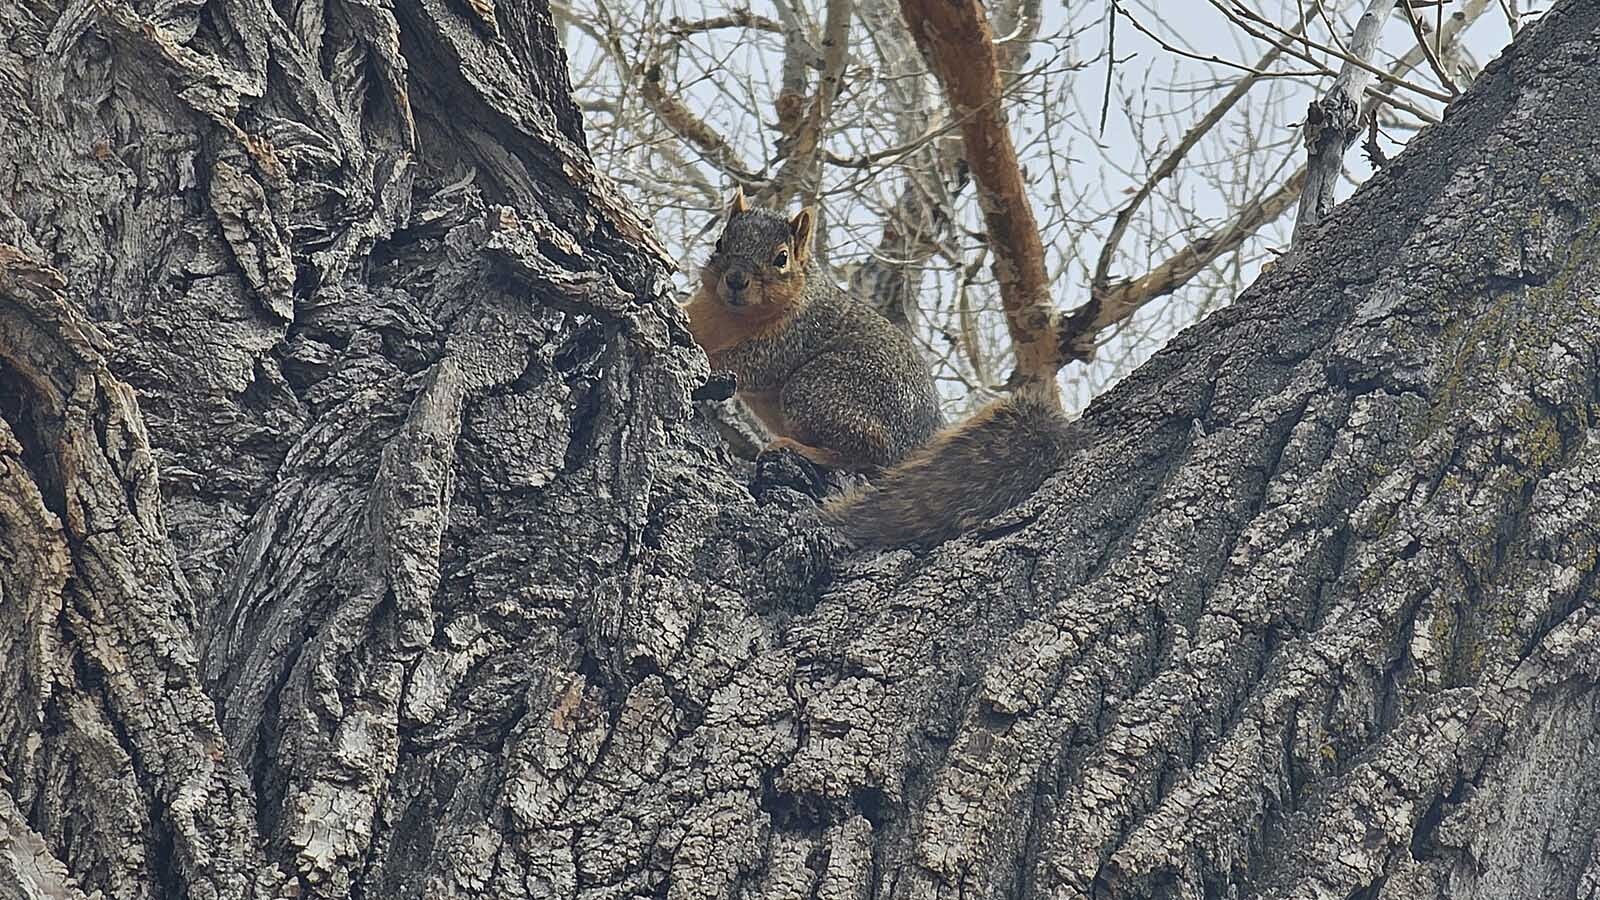 Squirrels are a problem for the city of Cheyenne trying to replace old cottonwoods because they kill saplings planted to take their place.